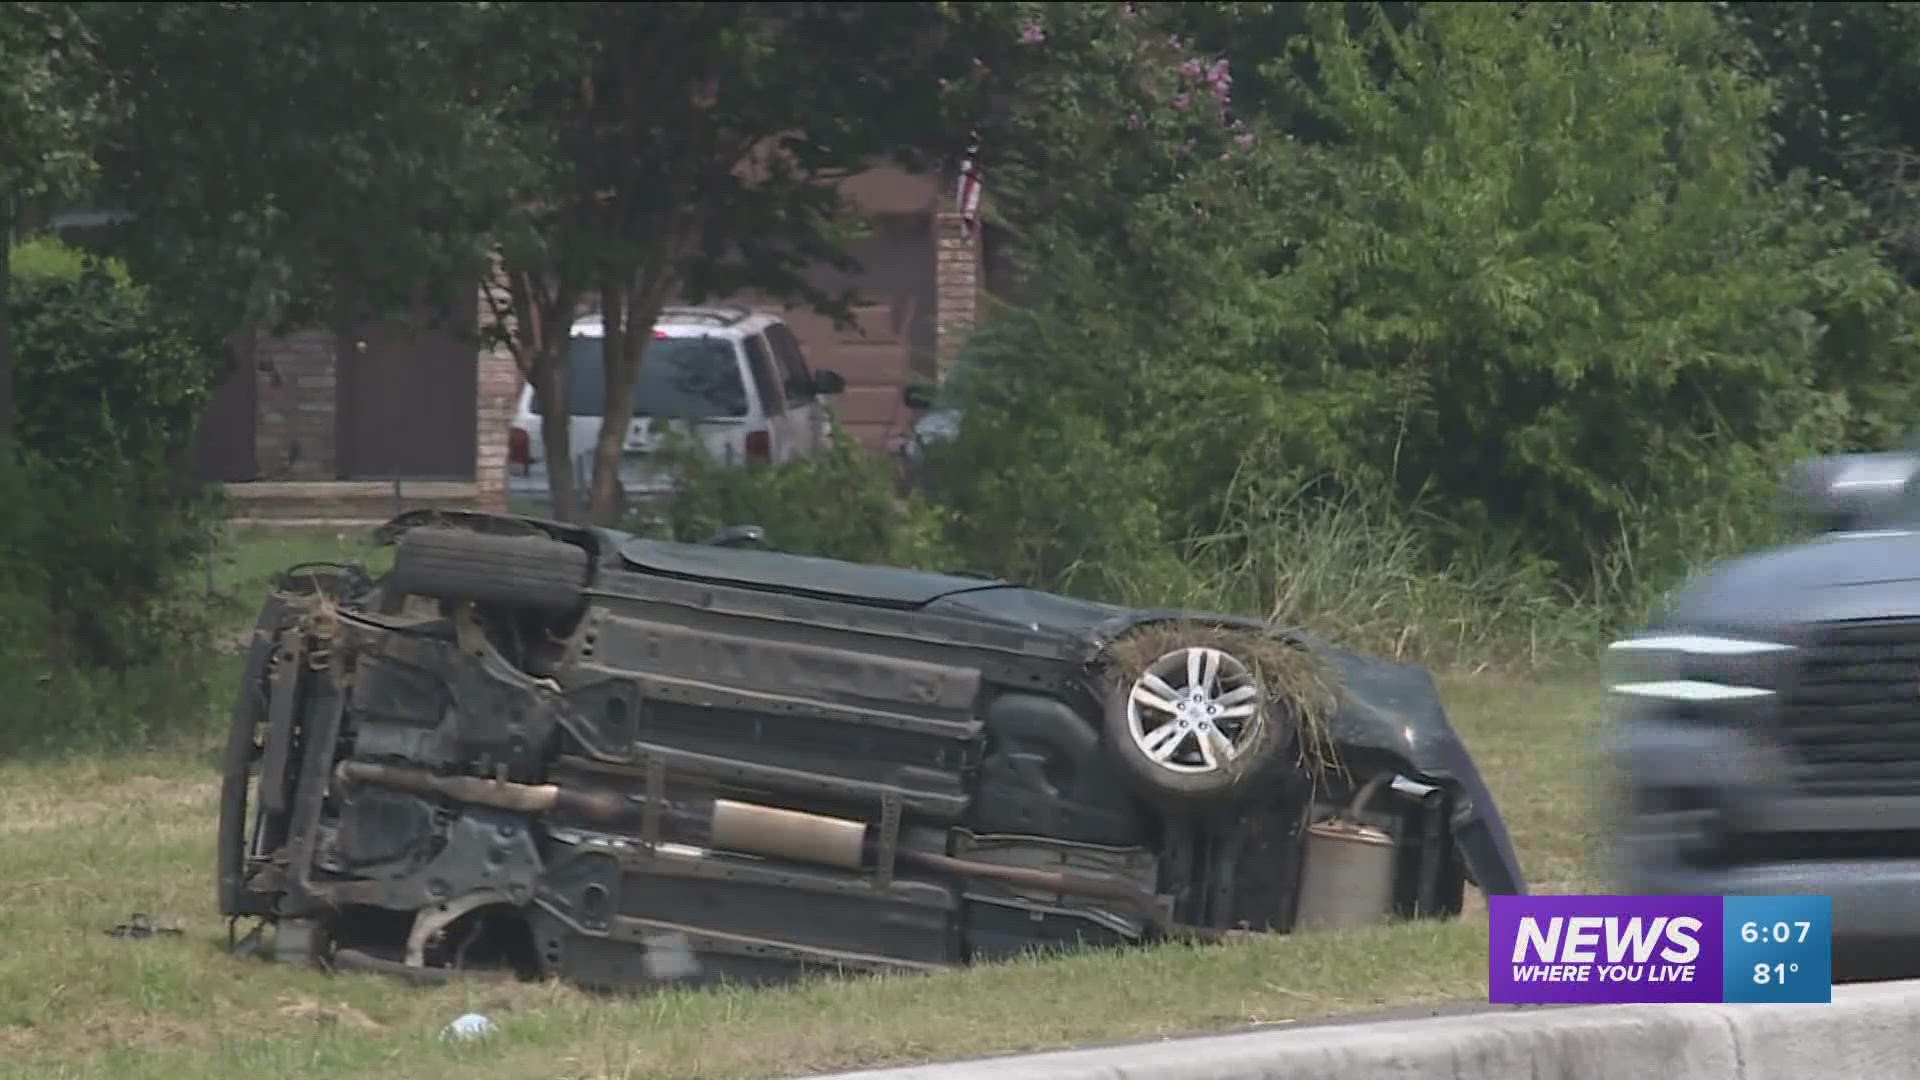 We now know the identity of the person killed in a rollover accident in Fort Smith.